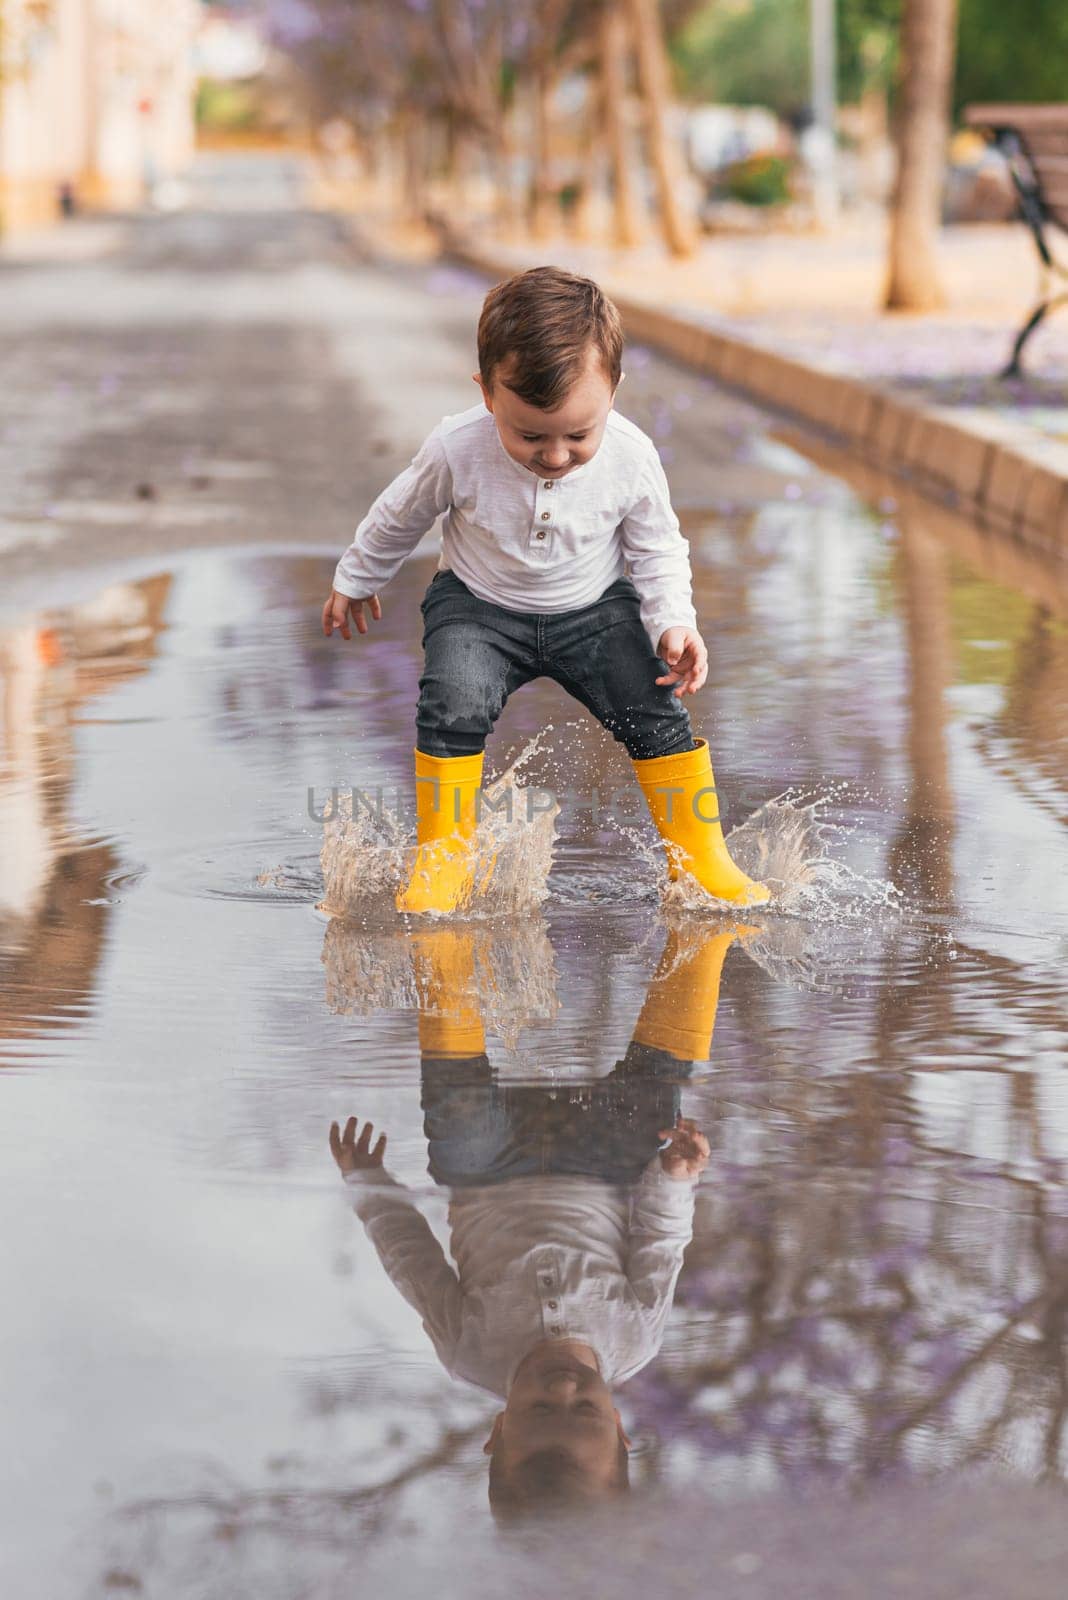 boy in yellow rubber boots jumping over a puddle in the rain by jcdiazhidalgo